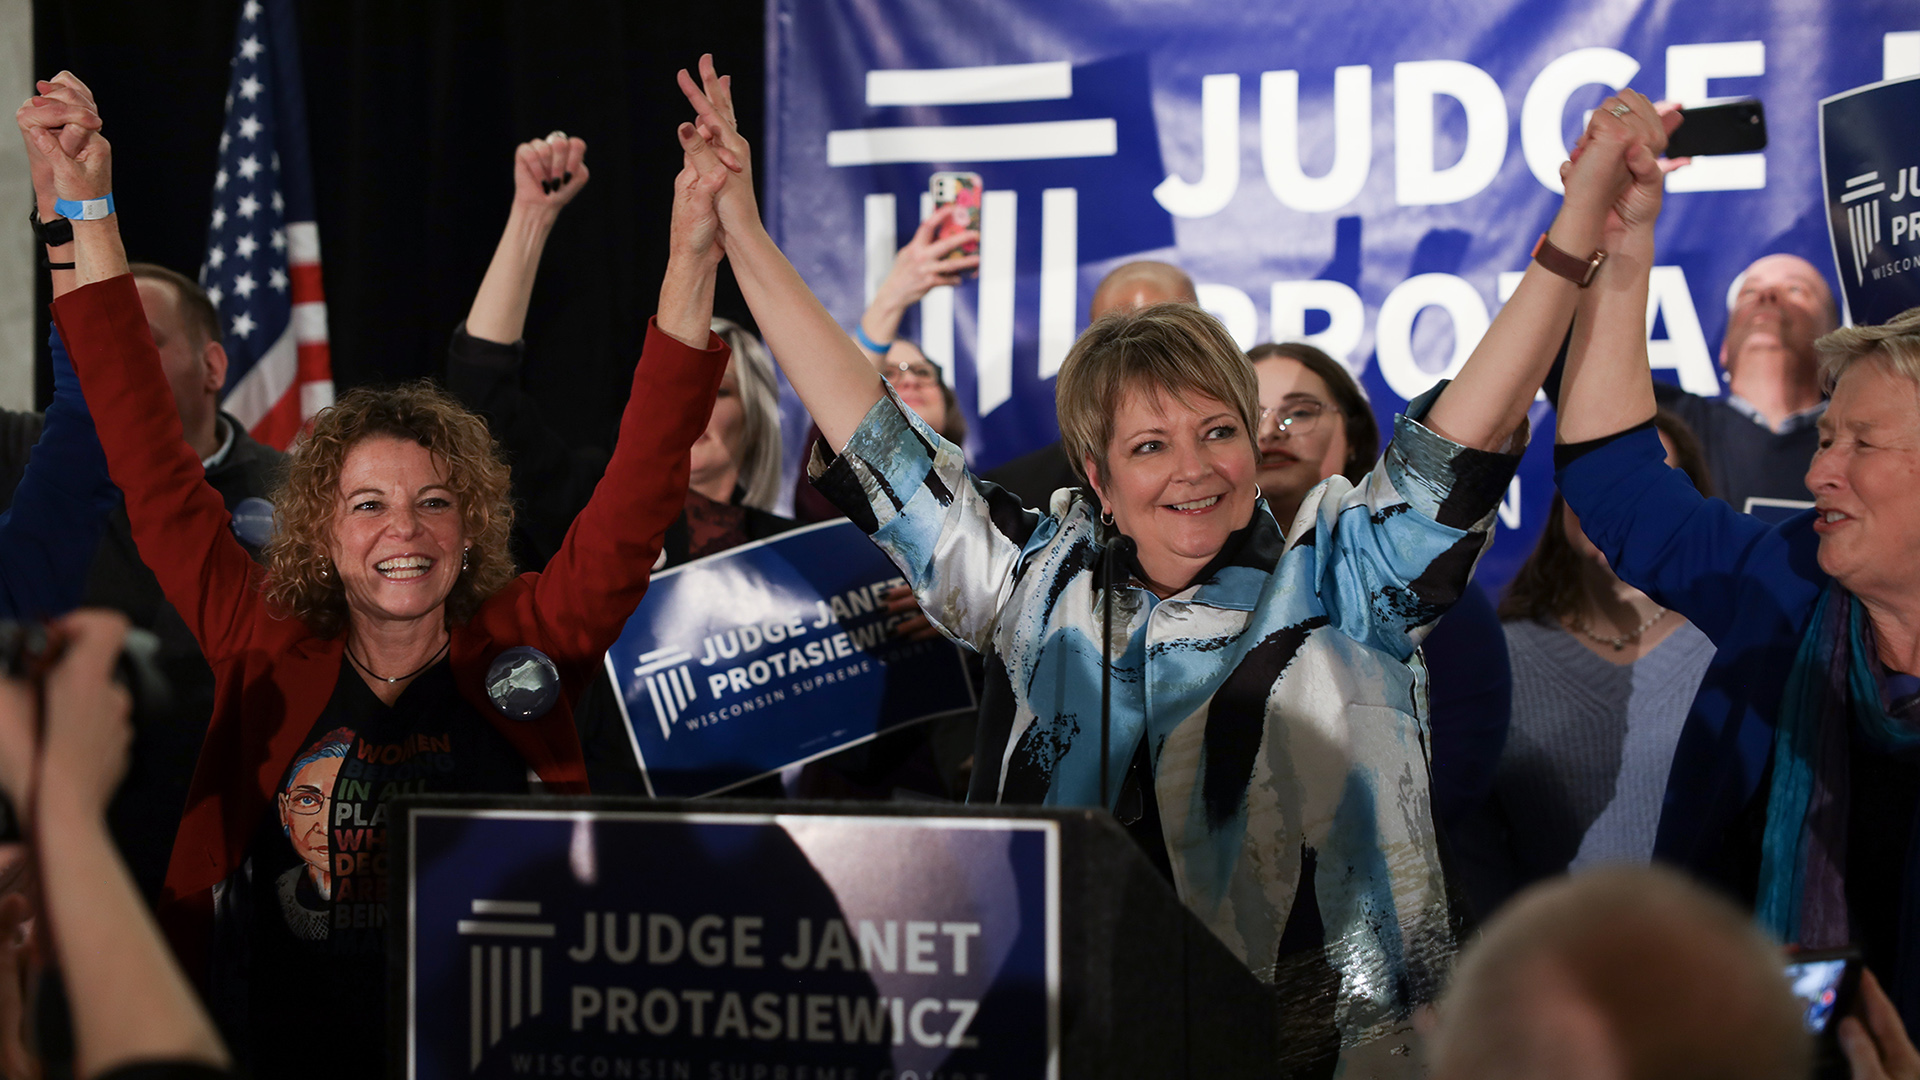 Janet Protasiewicz stands between Rebecca Dallet and Ann Walsh Bradley as they clasp hands and raise their arms in celebration, in a room with cheering people, a U.S. flag and multiple campaign signs that read "Justice Janet Protasiewicz,"